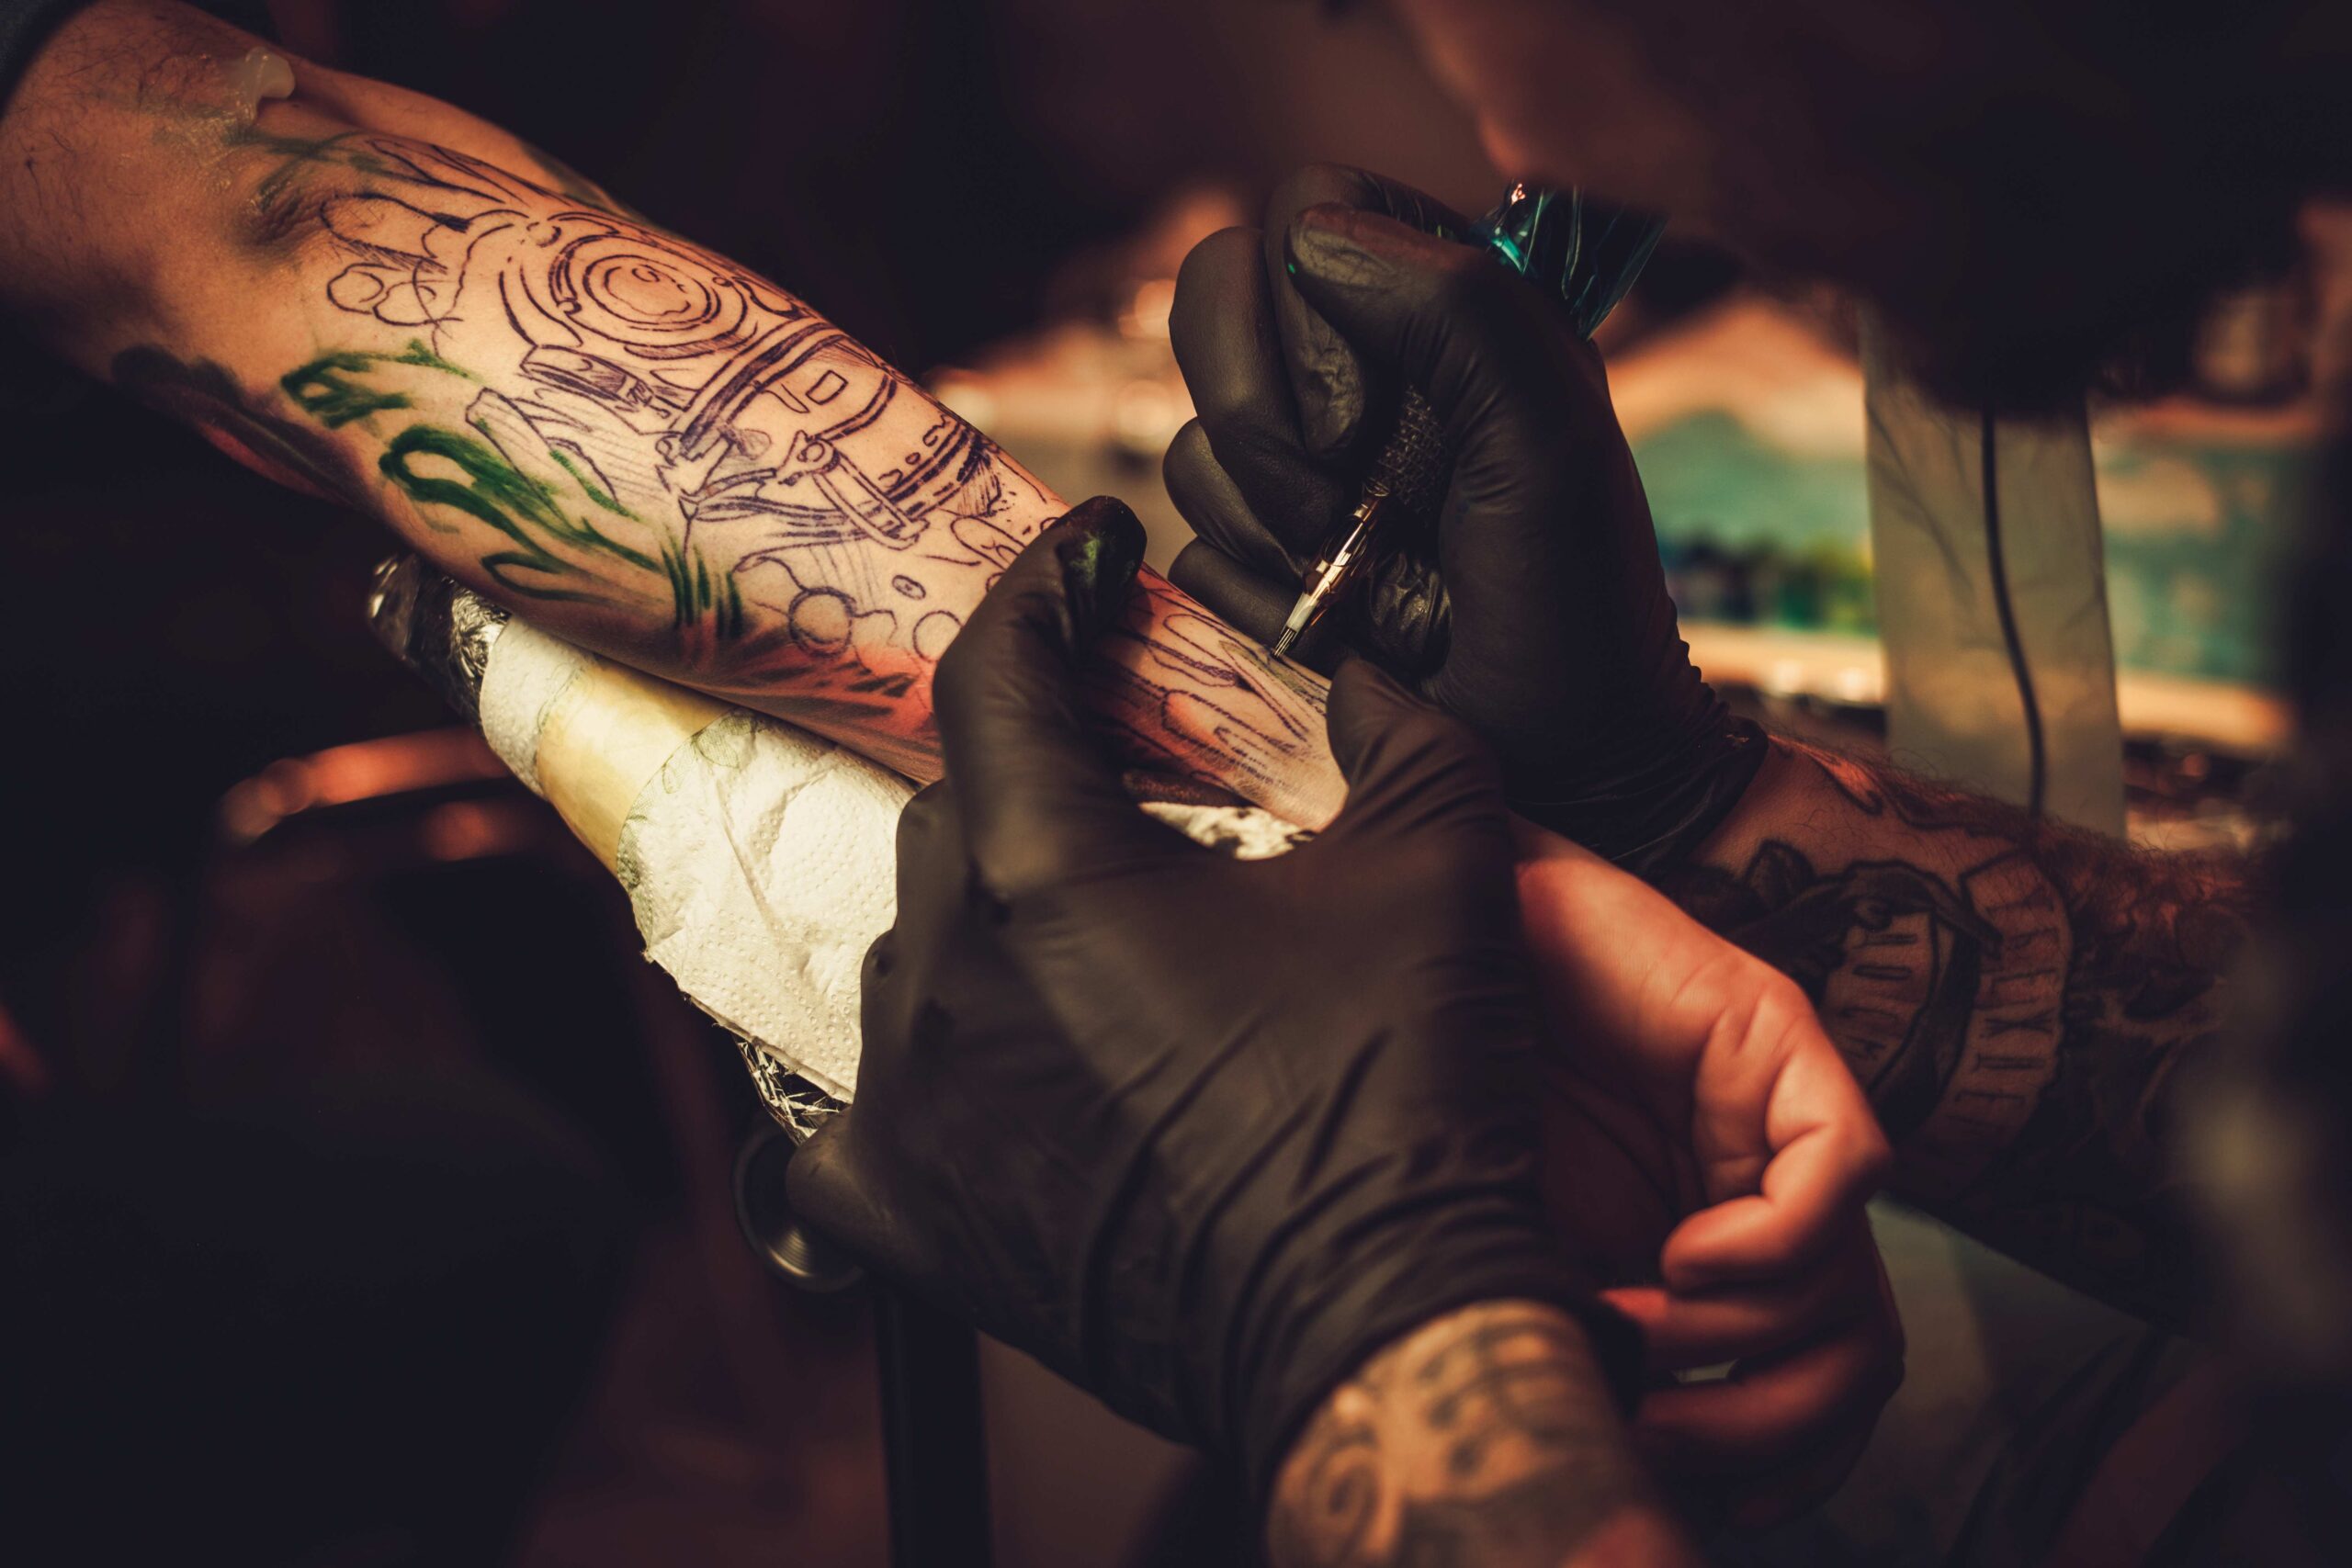 Professional Tattoo Artist Tattooing A Woman At His Studio Bali Indonesia  Stock Photo - Download Image Now - iStock